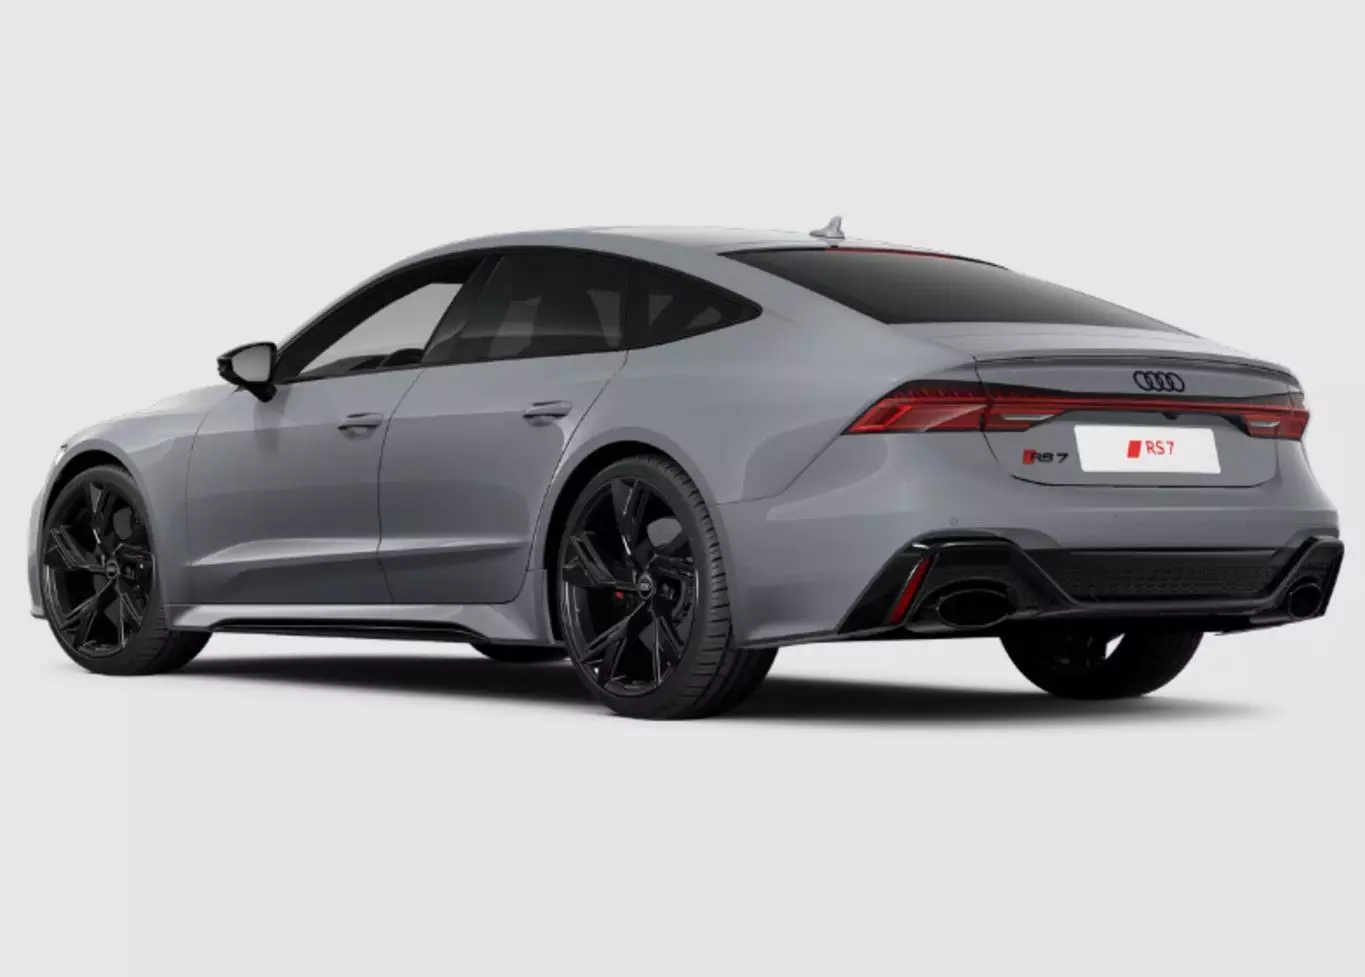 Audi RS7 exterior - Rear Right Angled